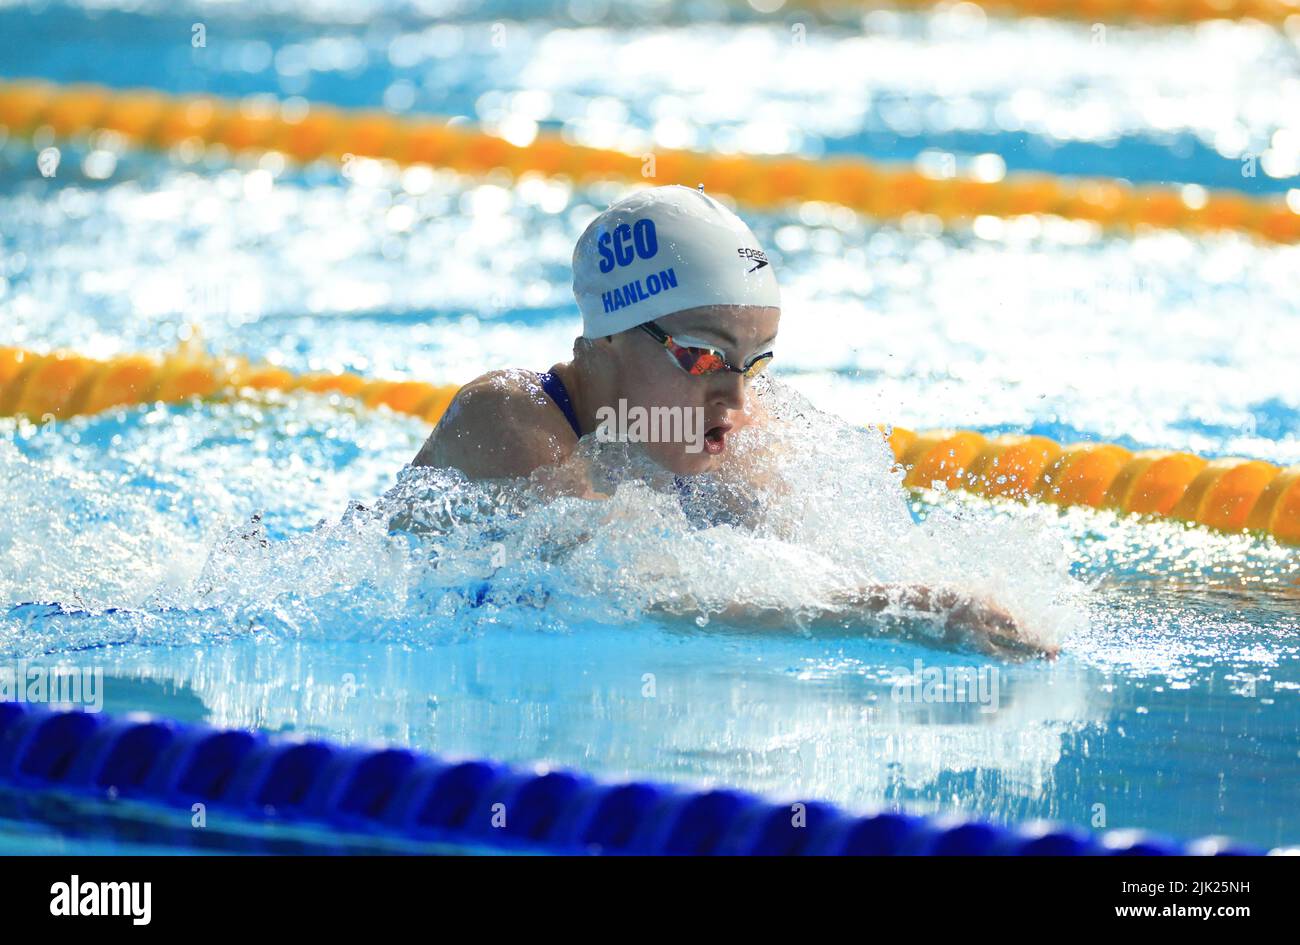 Scotland's Kara Aline Hanlon in the Women's 50m Breaststroke - Semi-Final 1 at Sandwell Aquatics Centre on day one of 2022 Commonwealth Games in Birmingham. Picture date: Friday July 29, 2022. Stock Photo